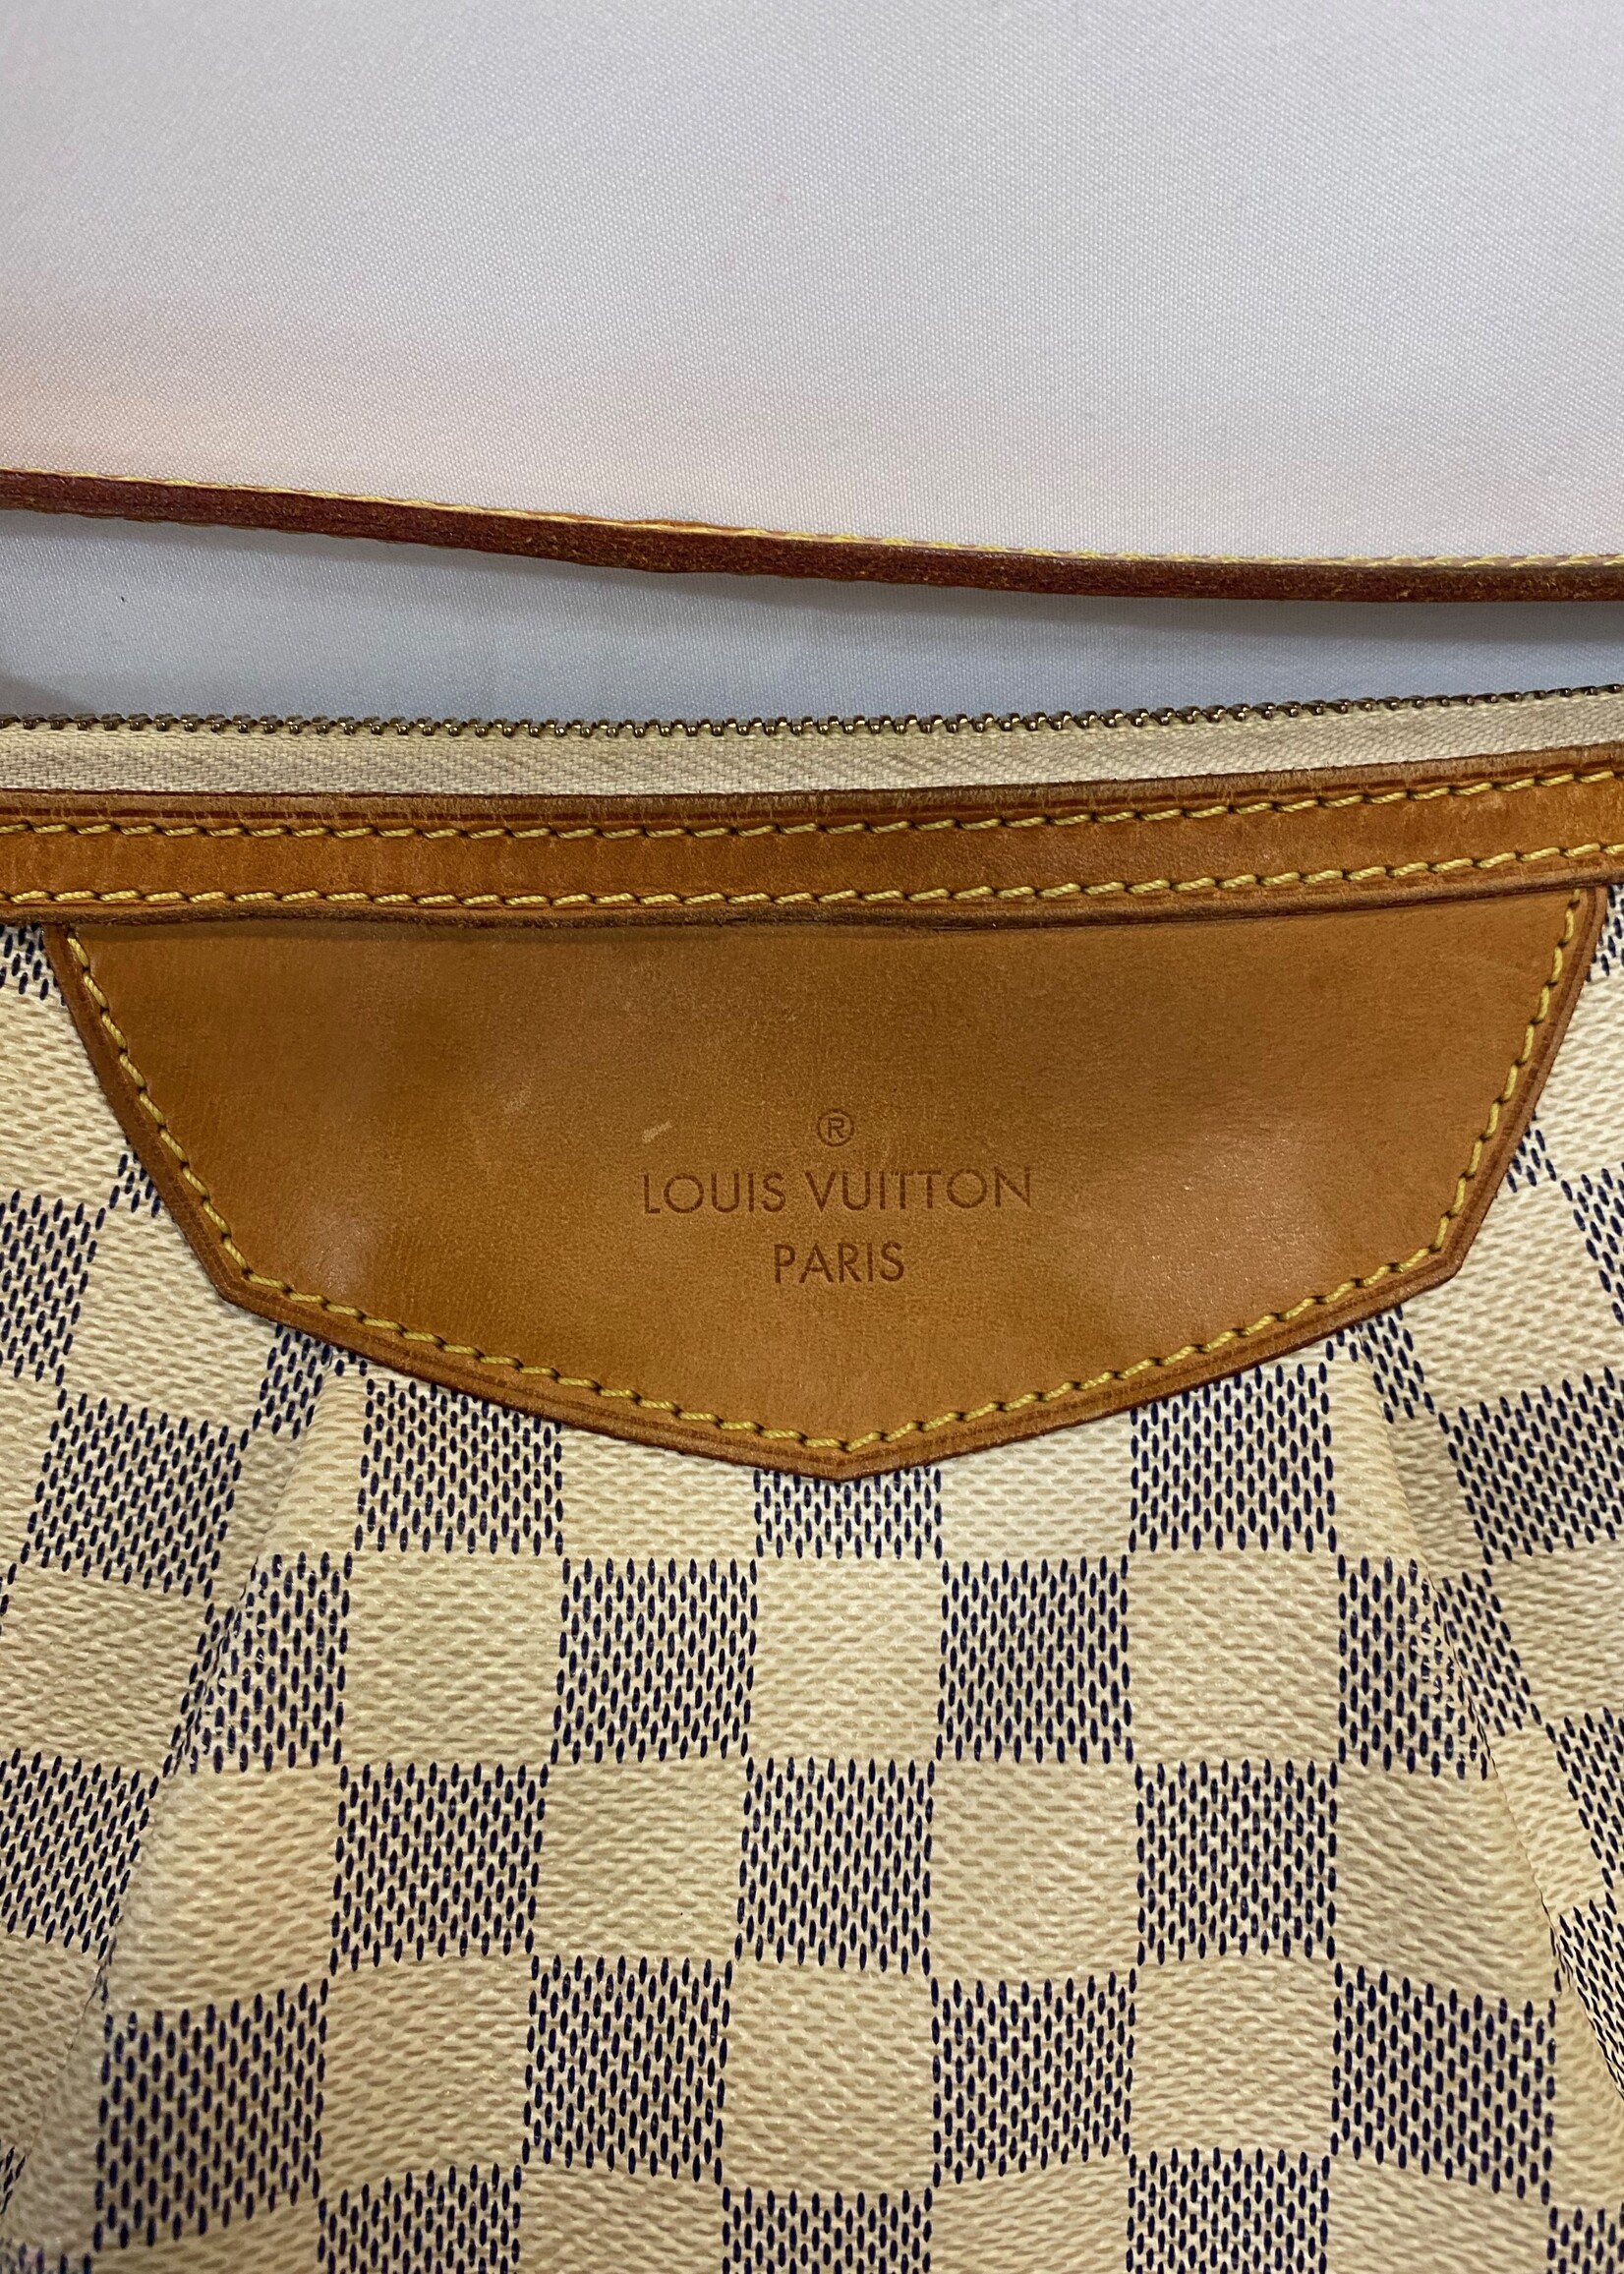 Authenticated Used Auth Louis Vuitton Damier Azur Siracusa PM N41113  Women's Shoulder Bag 